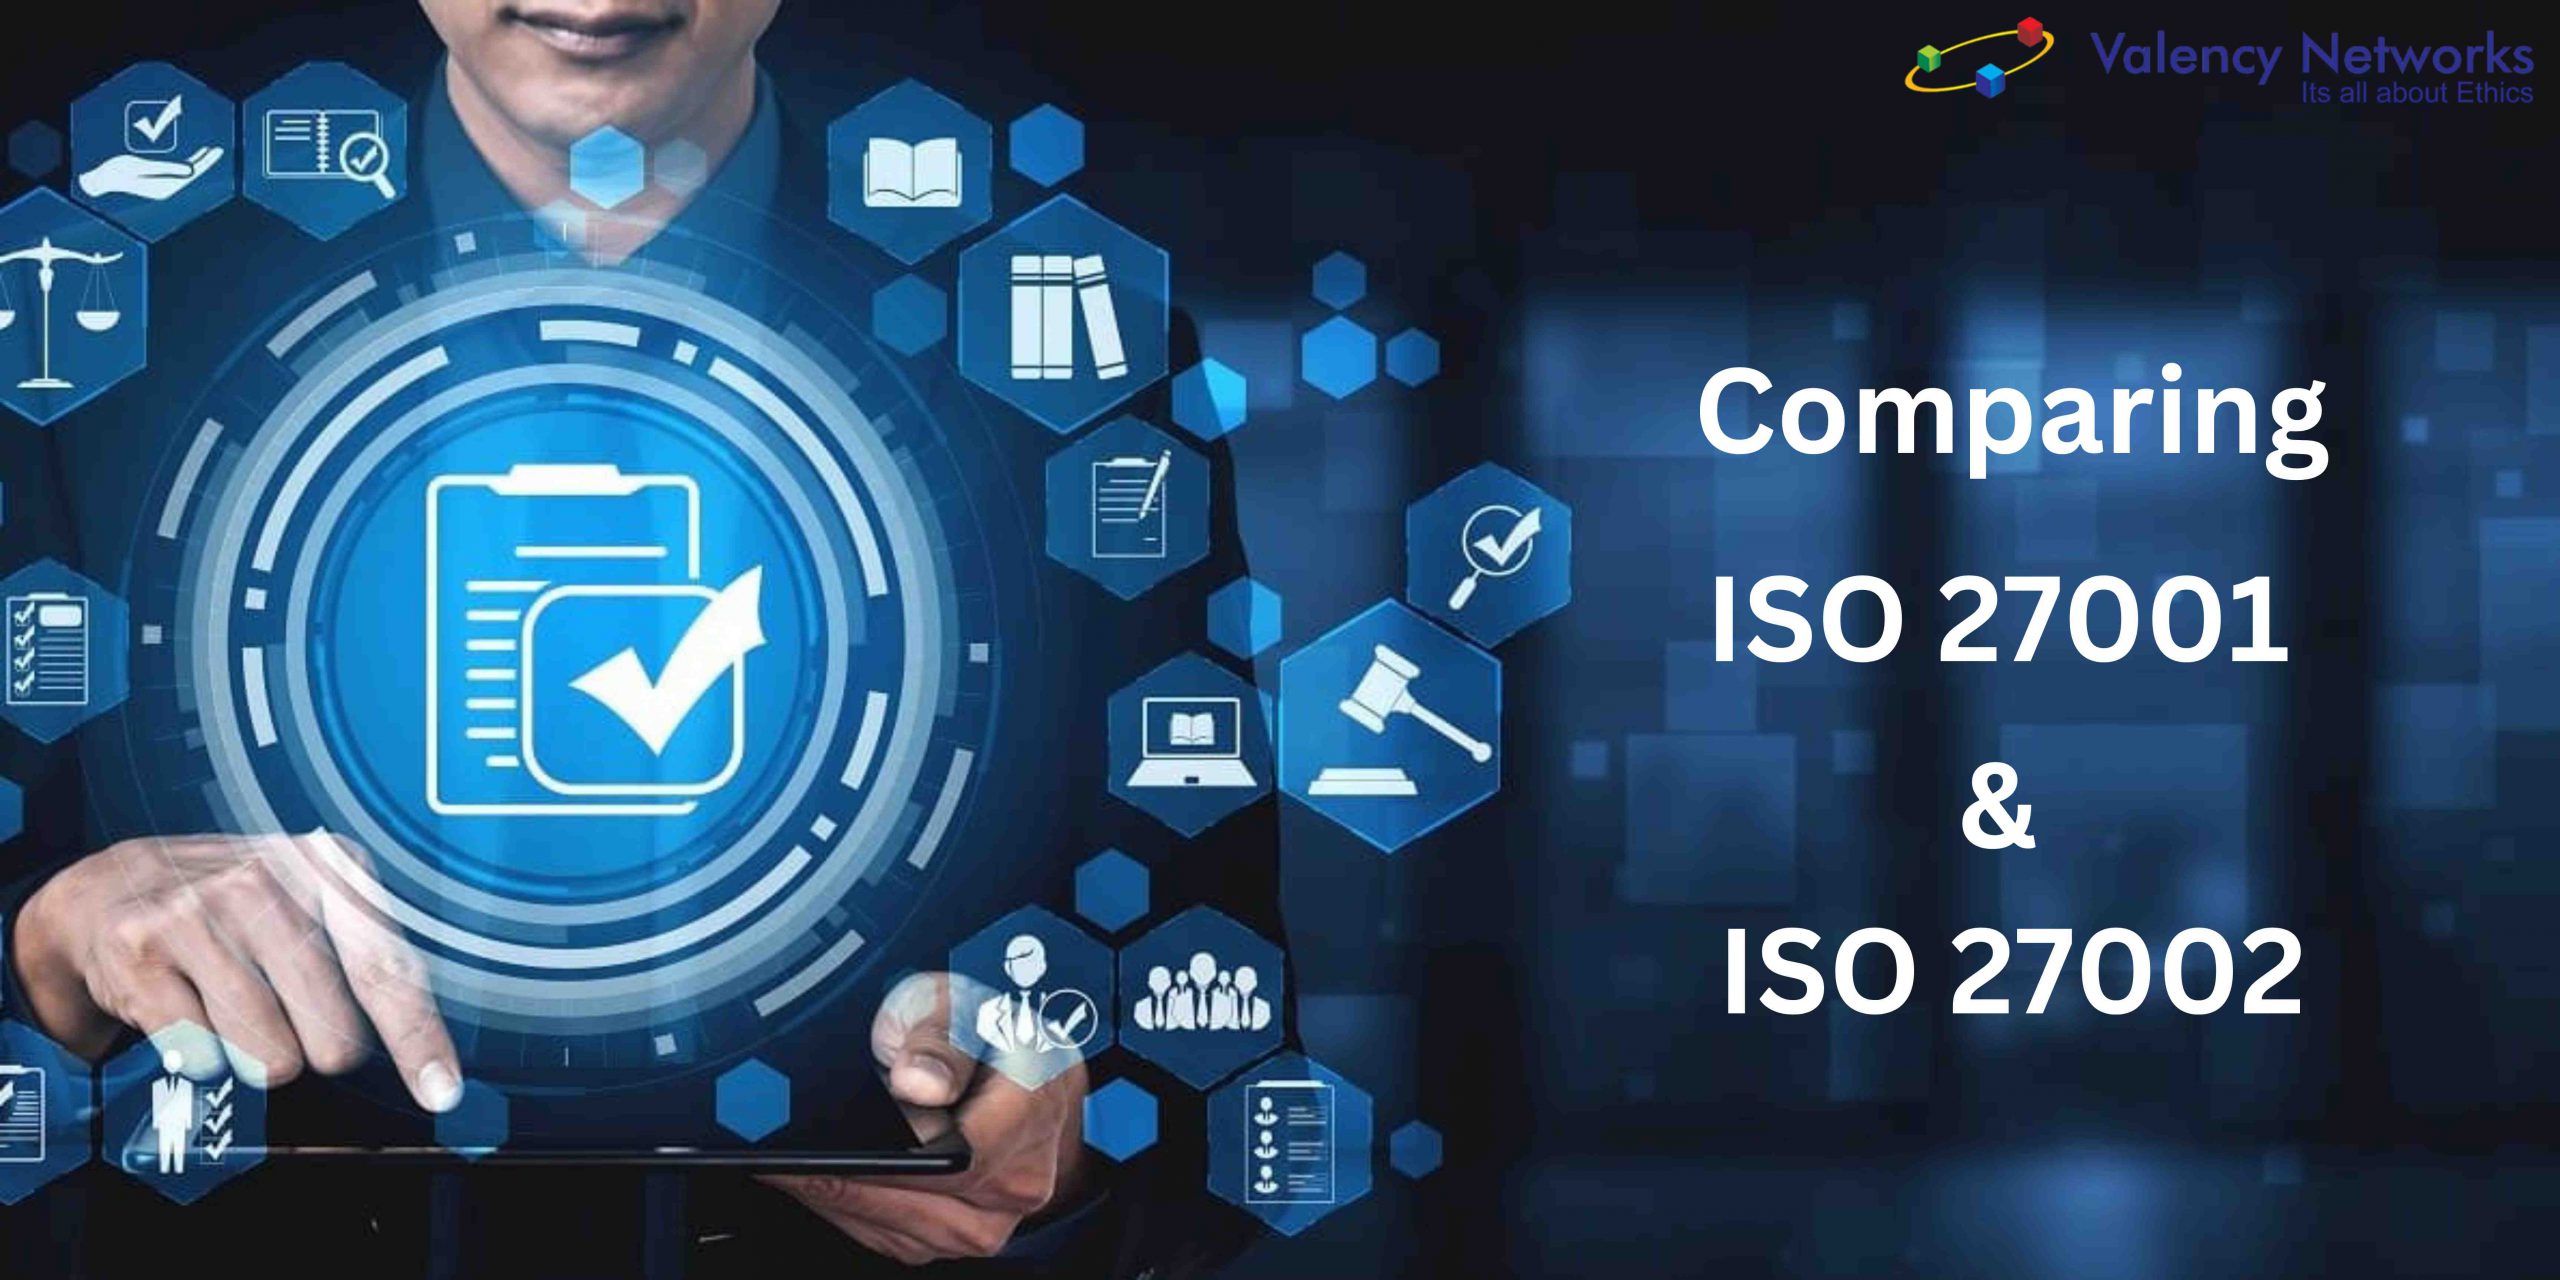 What is the difference between ISO 27001 and 27002